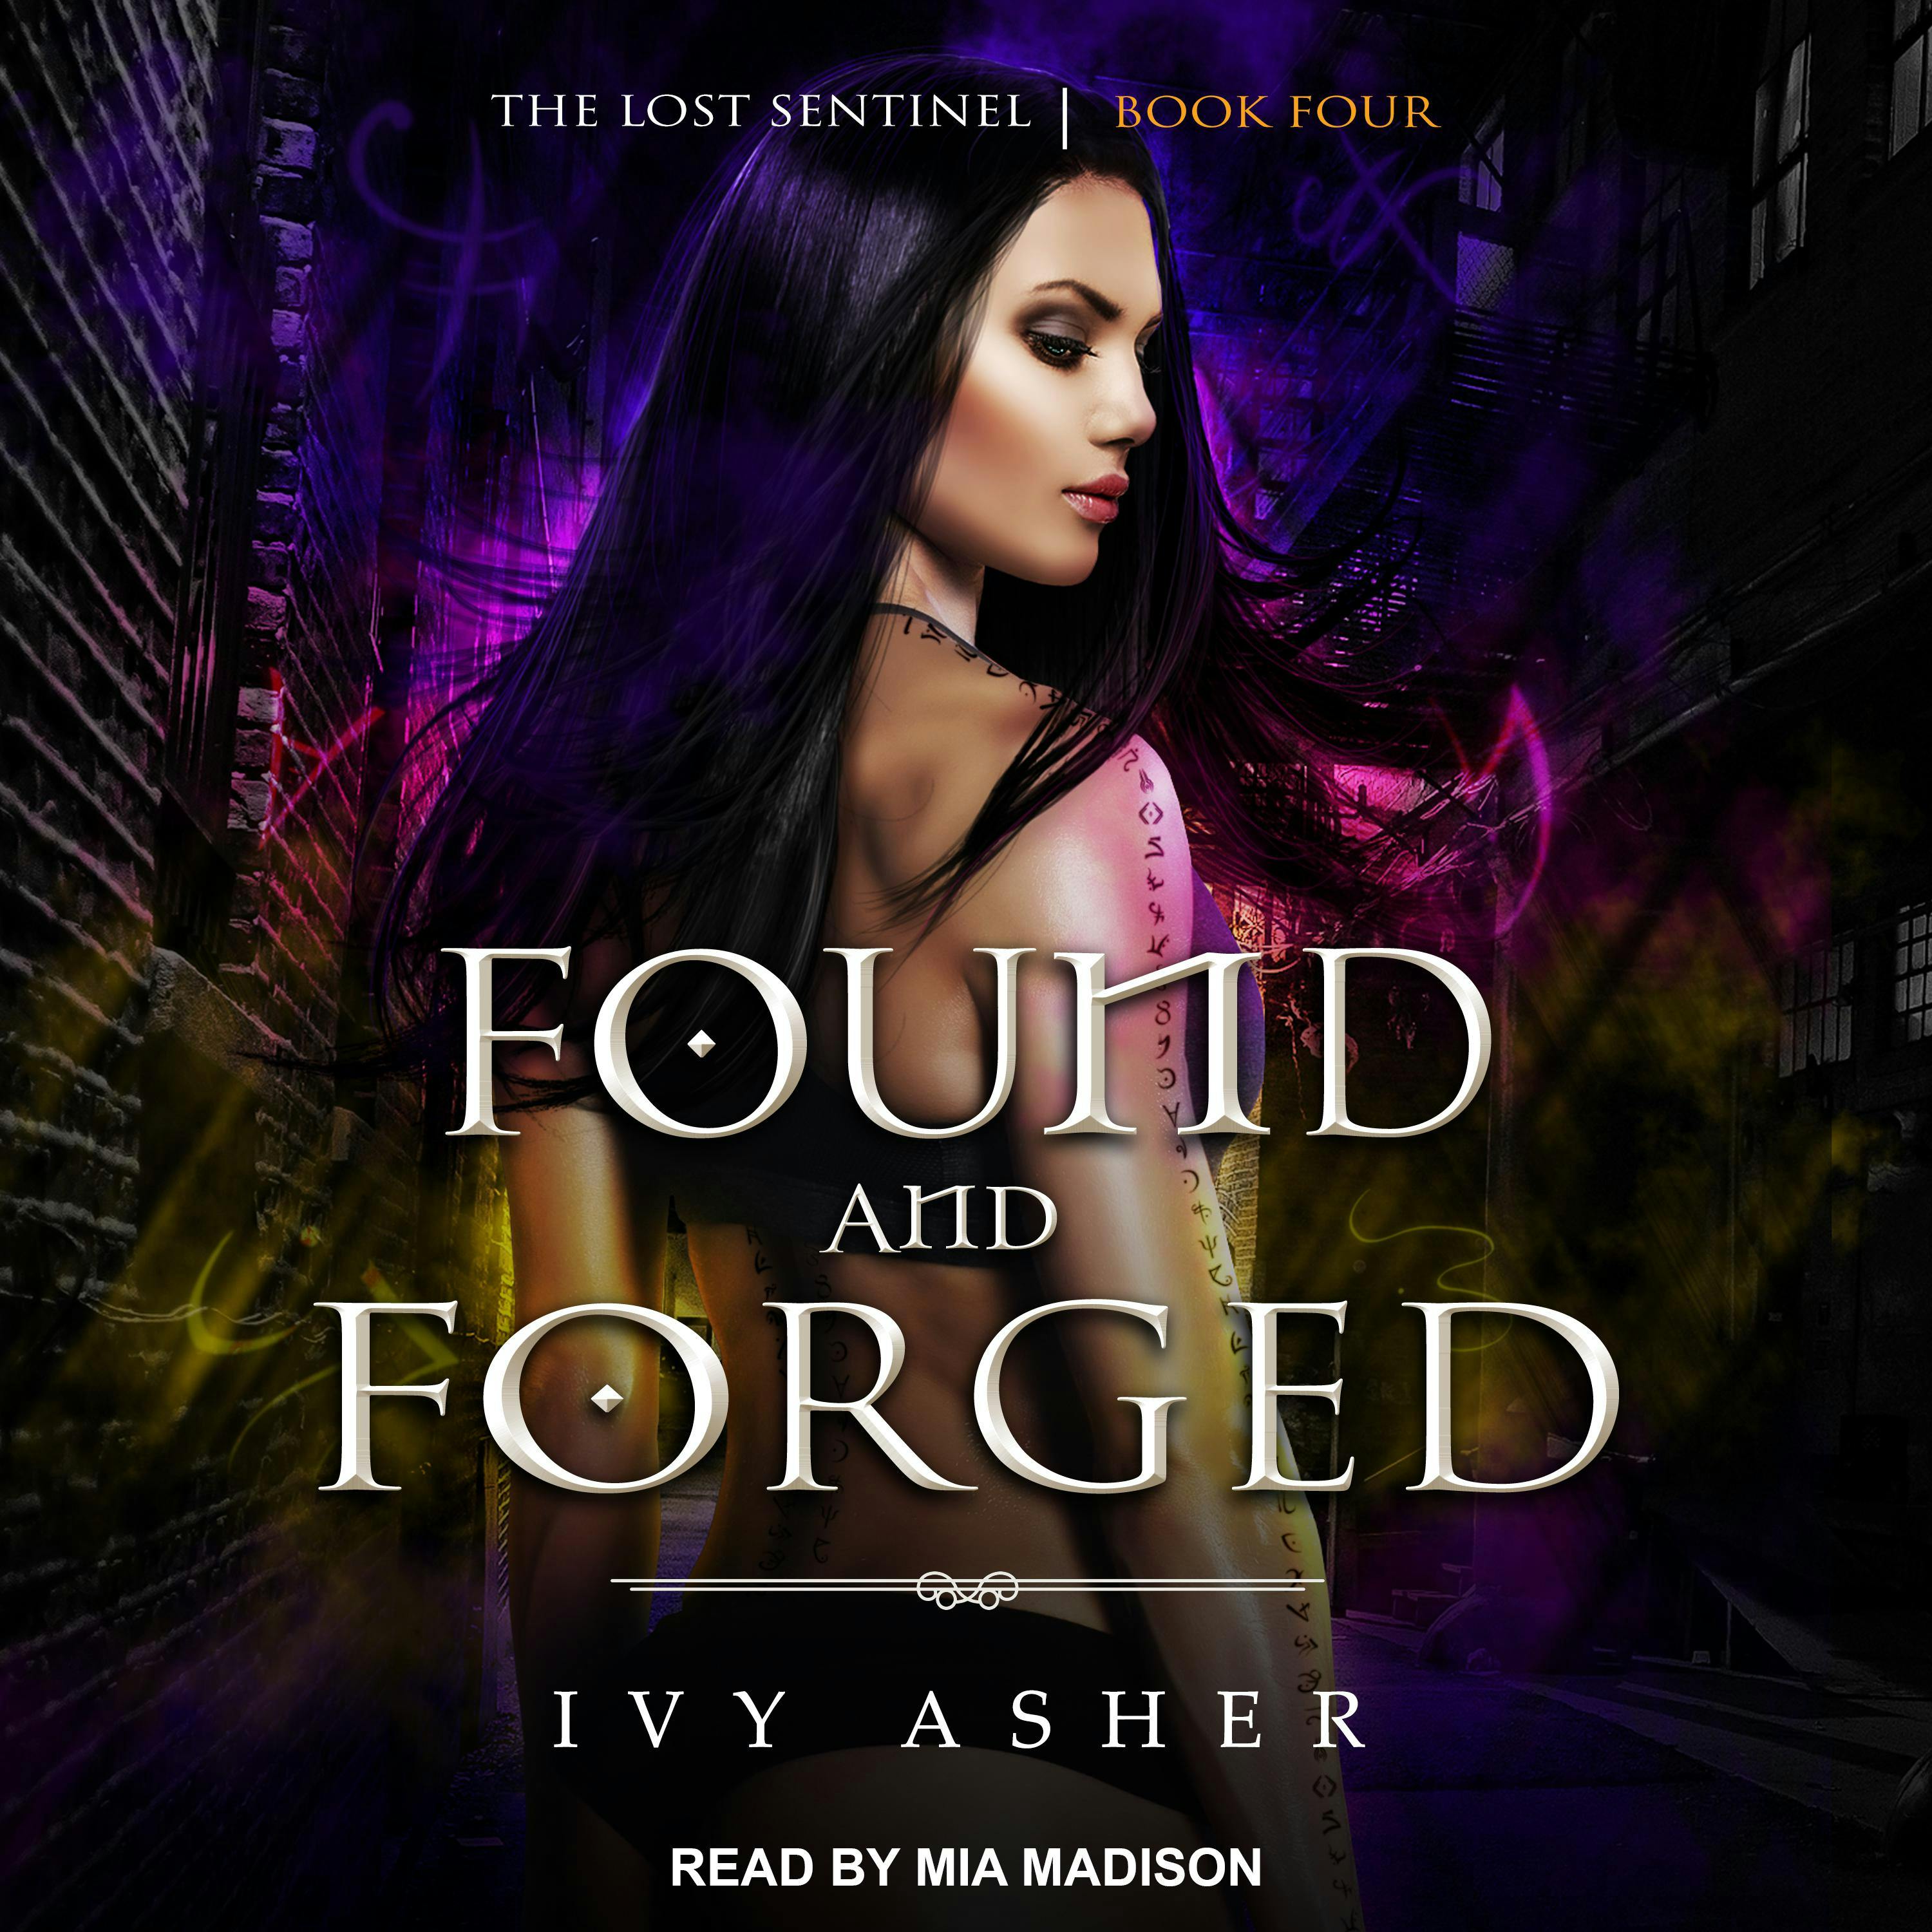 Found and Forged: The Lost Sentinel Book Four - Ivy Asher